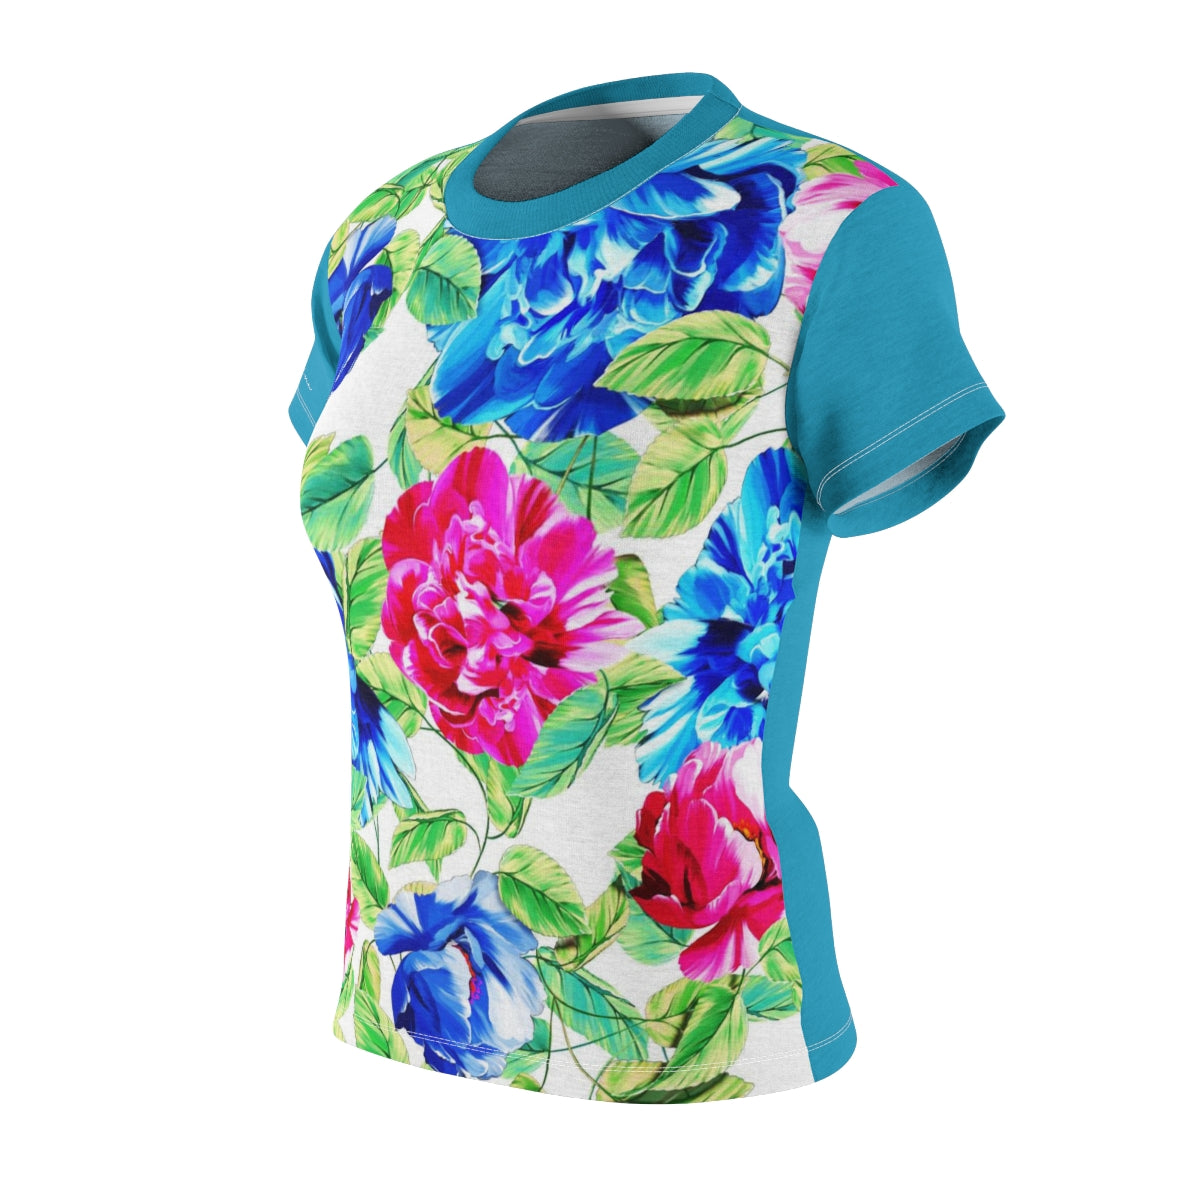 T-Shirt, Turquoise Floral Look